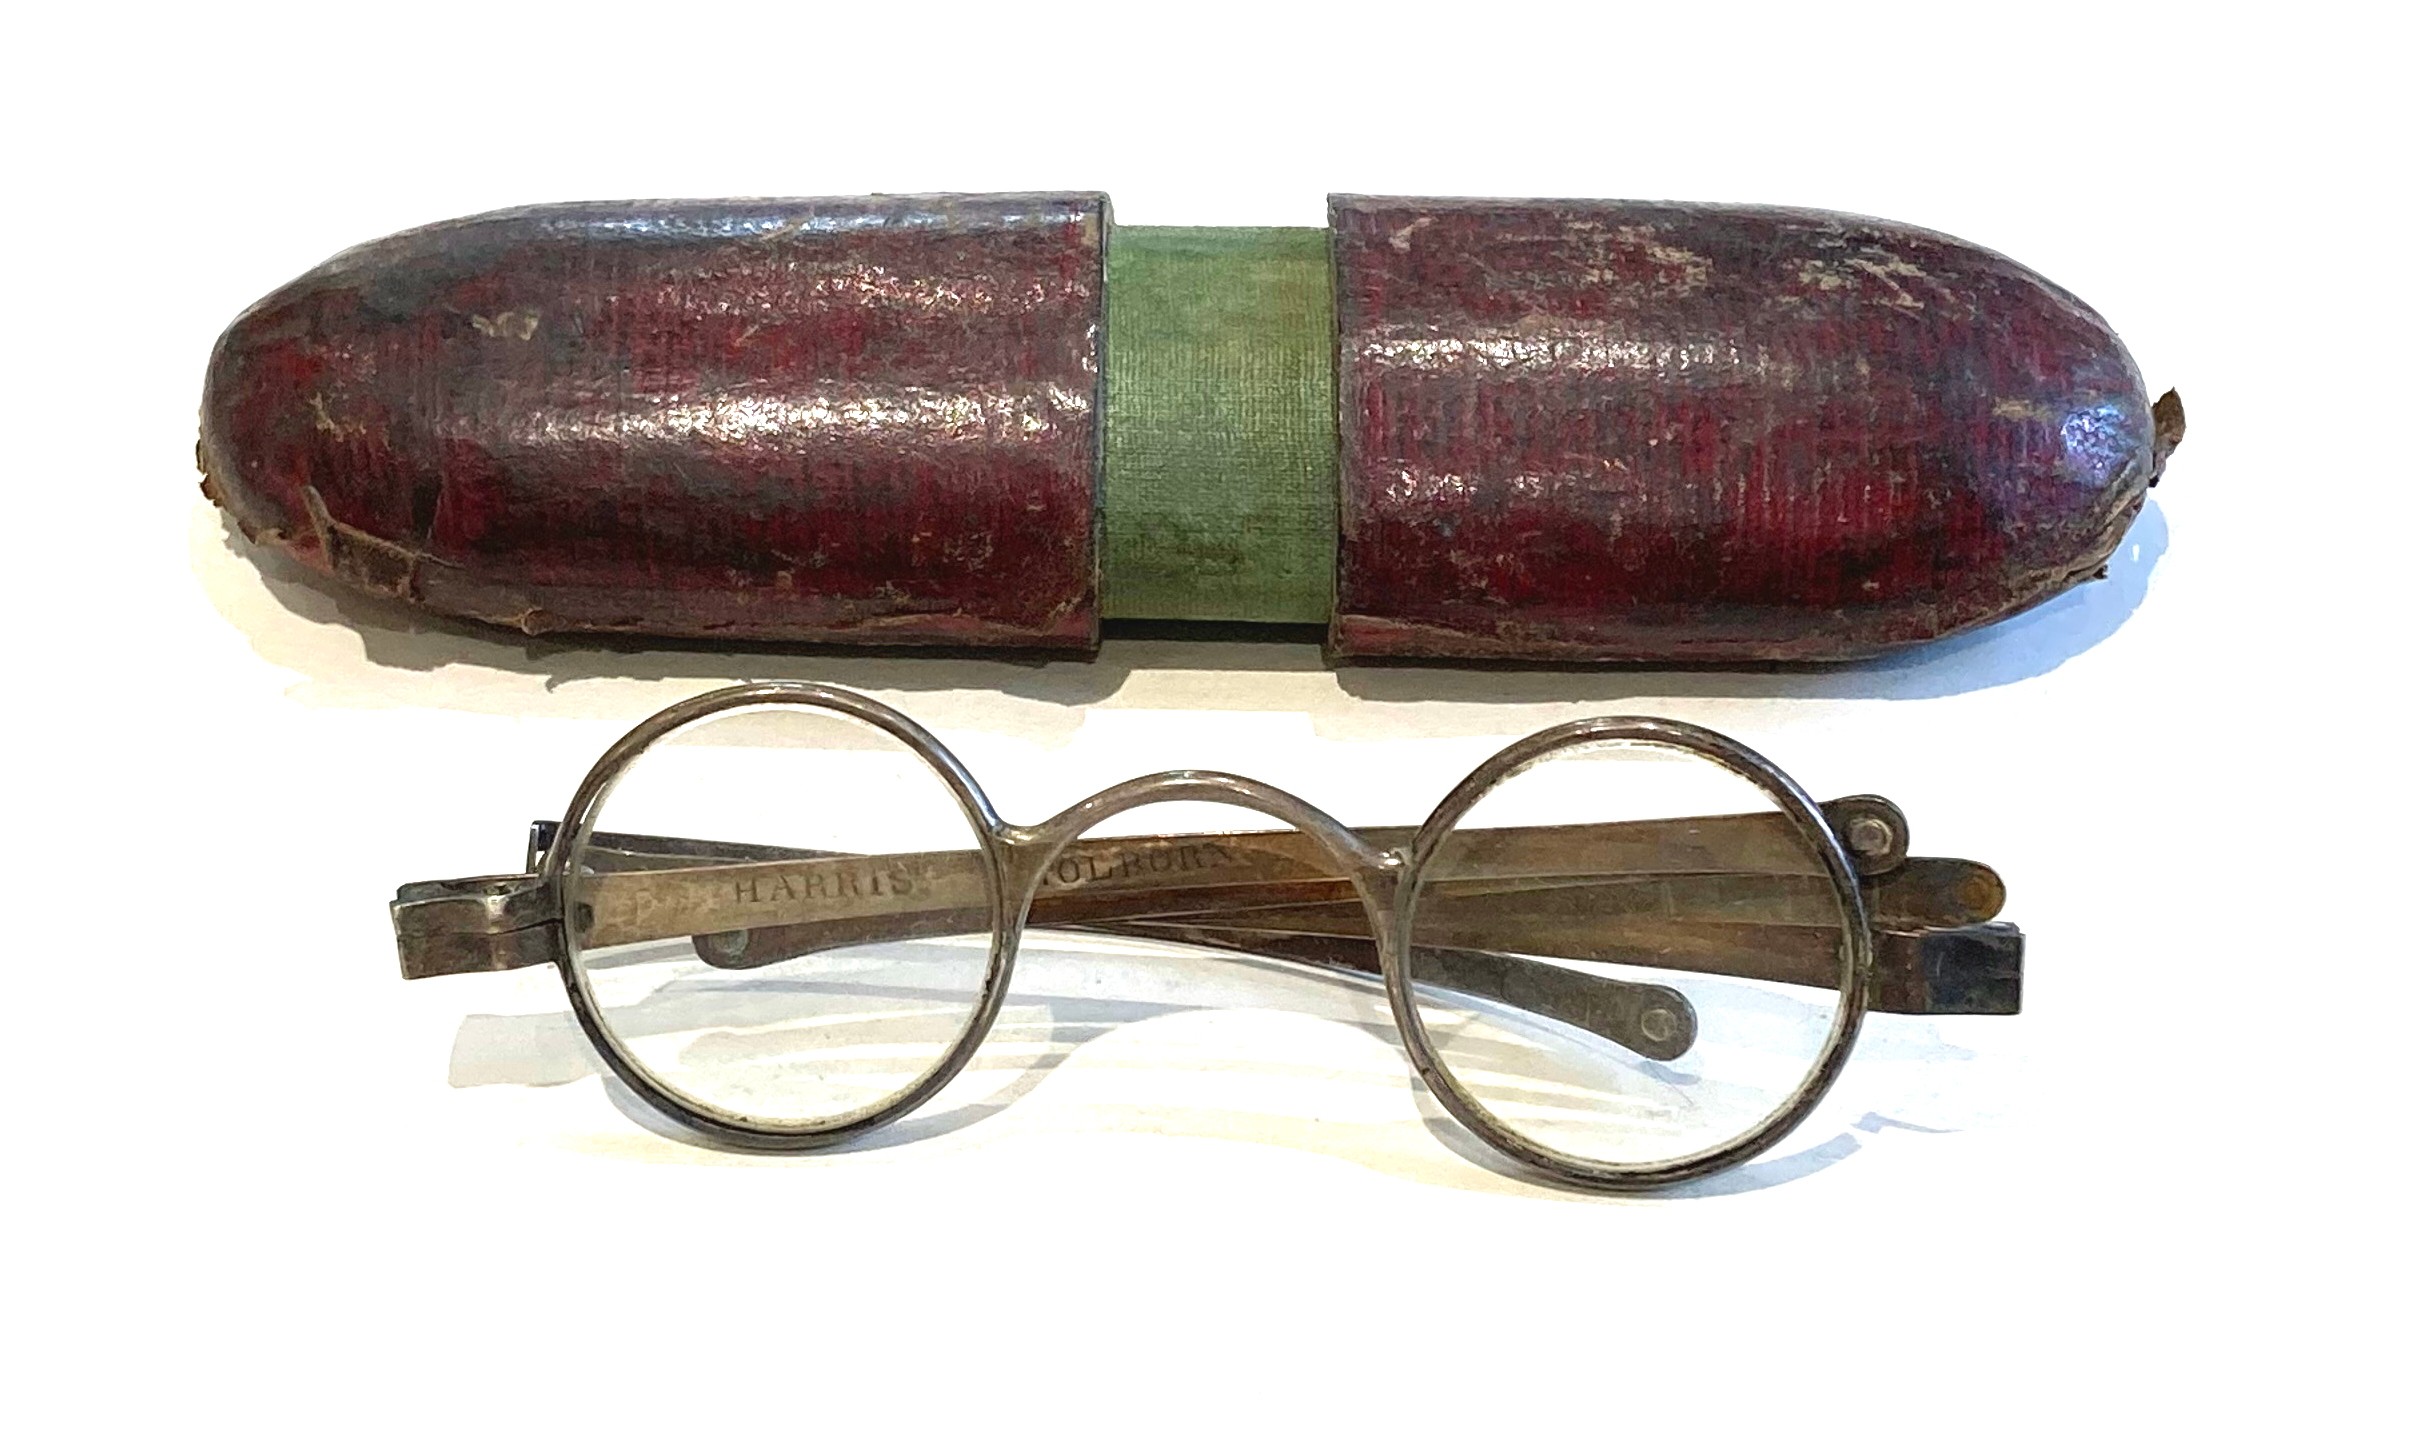 A pair of 19th century silver folding spectacles, by Harris & Co, 50 Holborn, the frames with